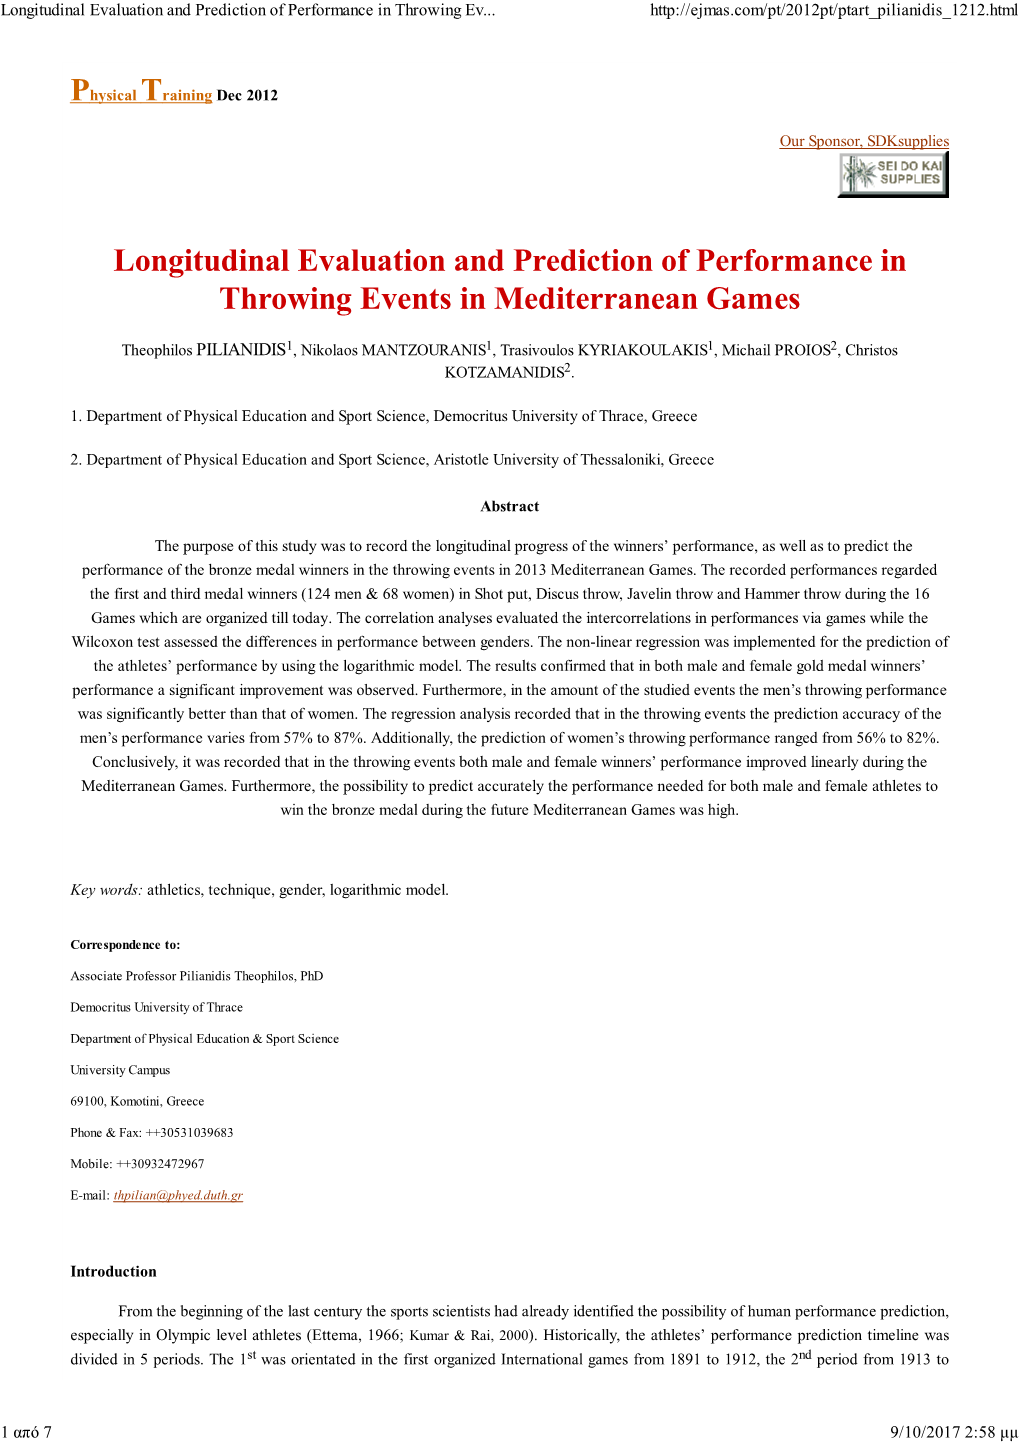 Longitudinal Evaluation and Prediction of Performance in Throwing Ev